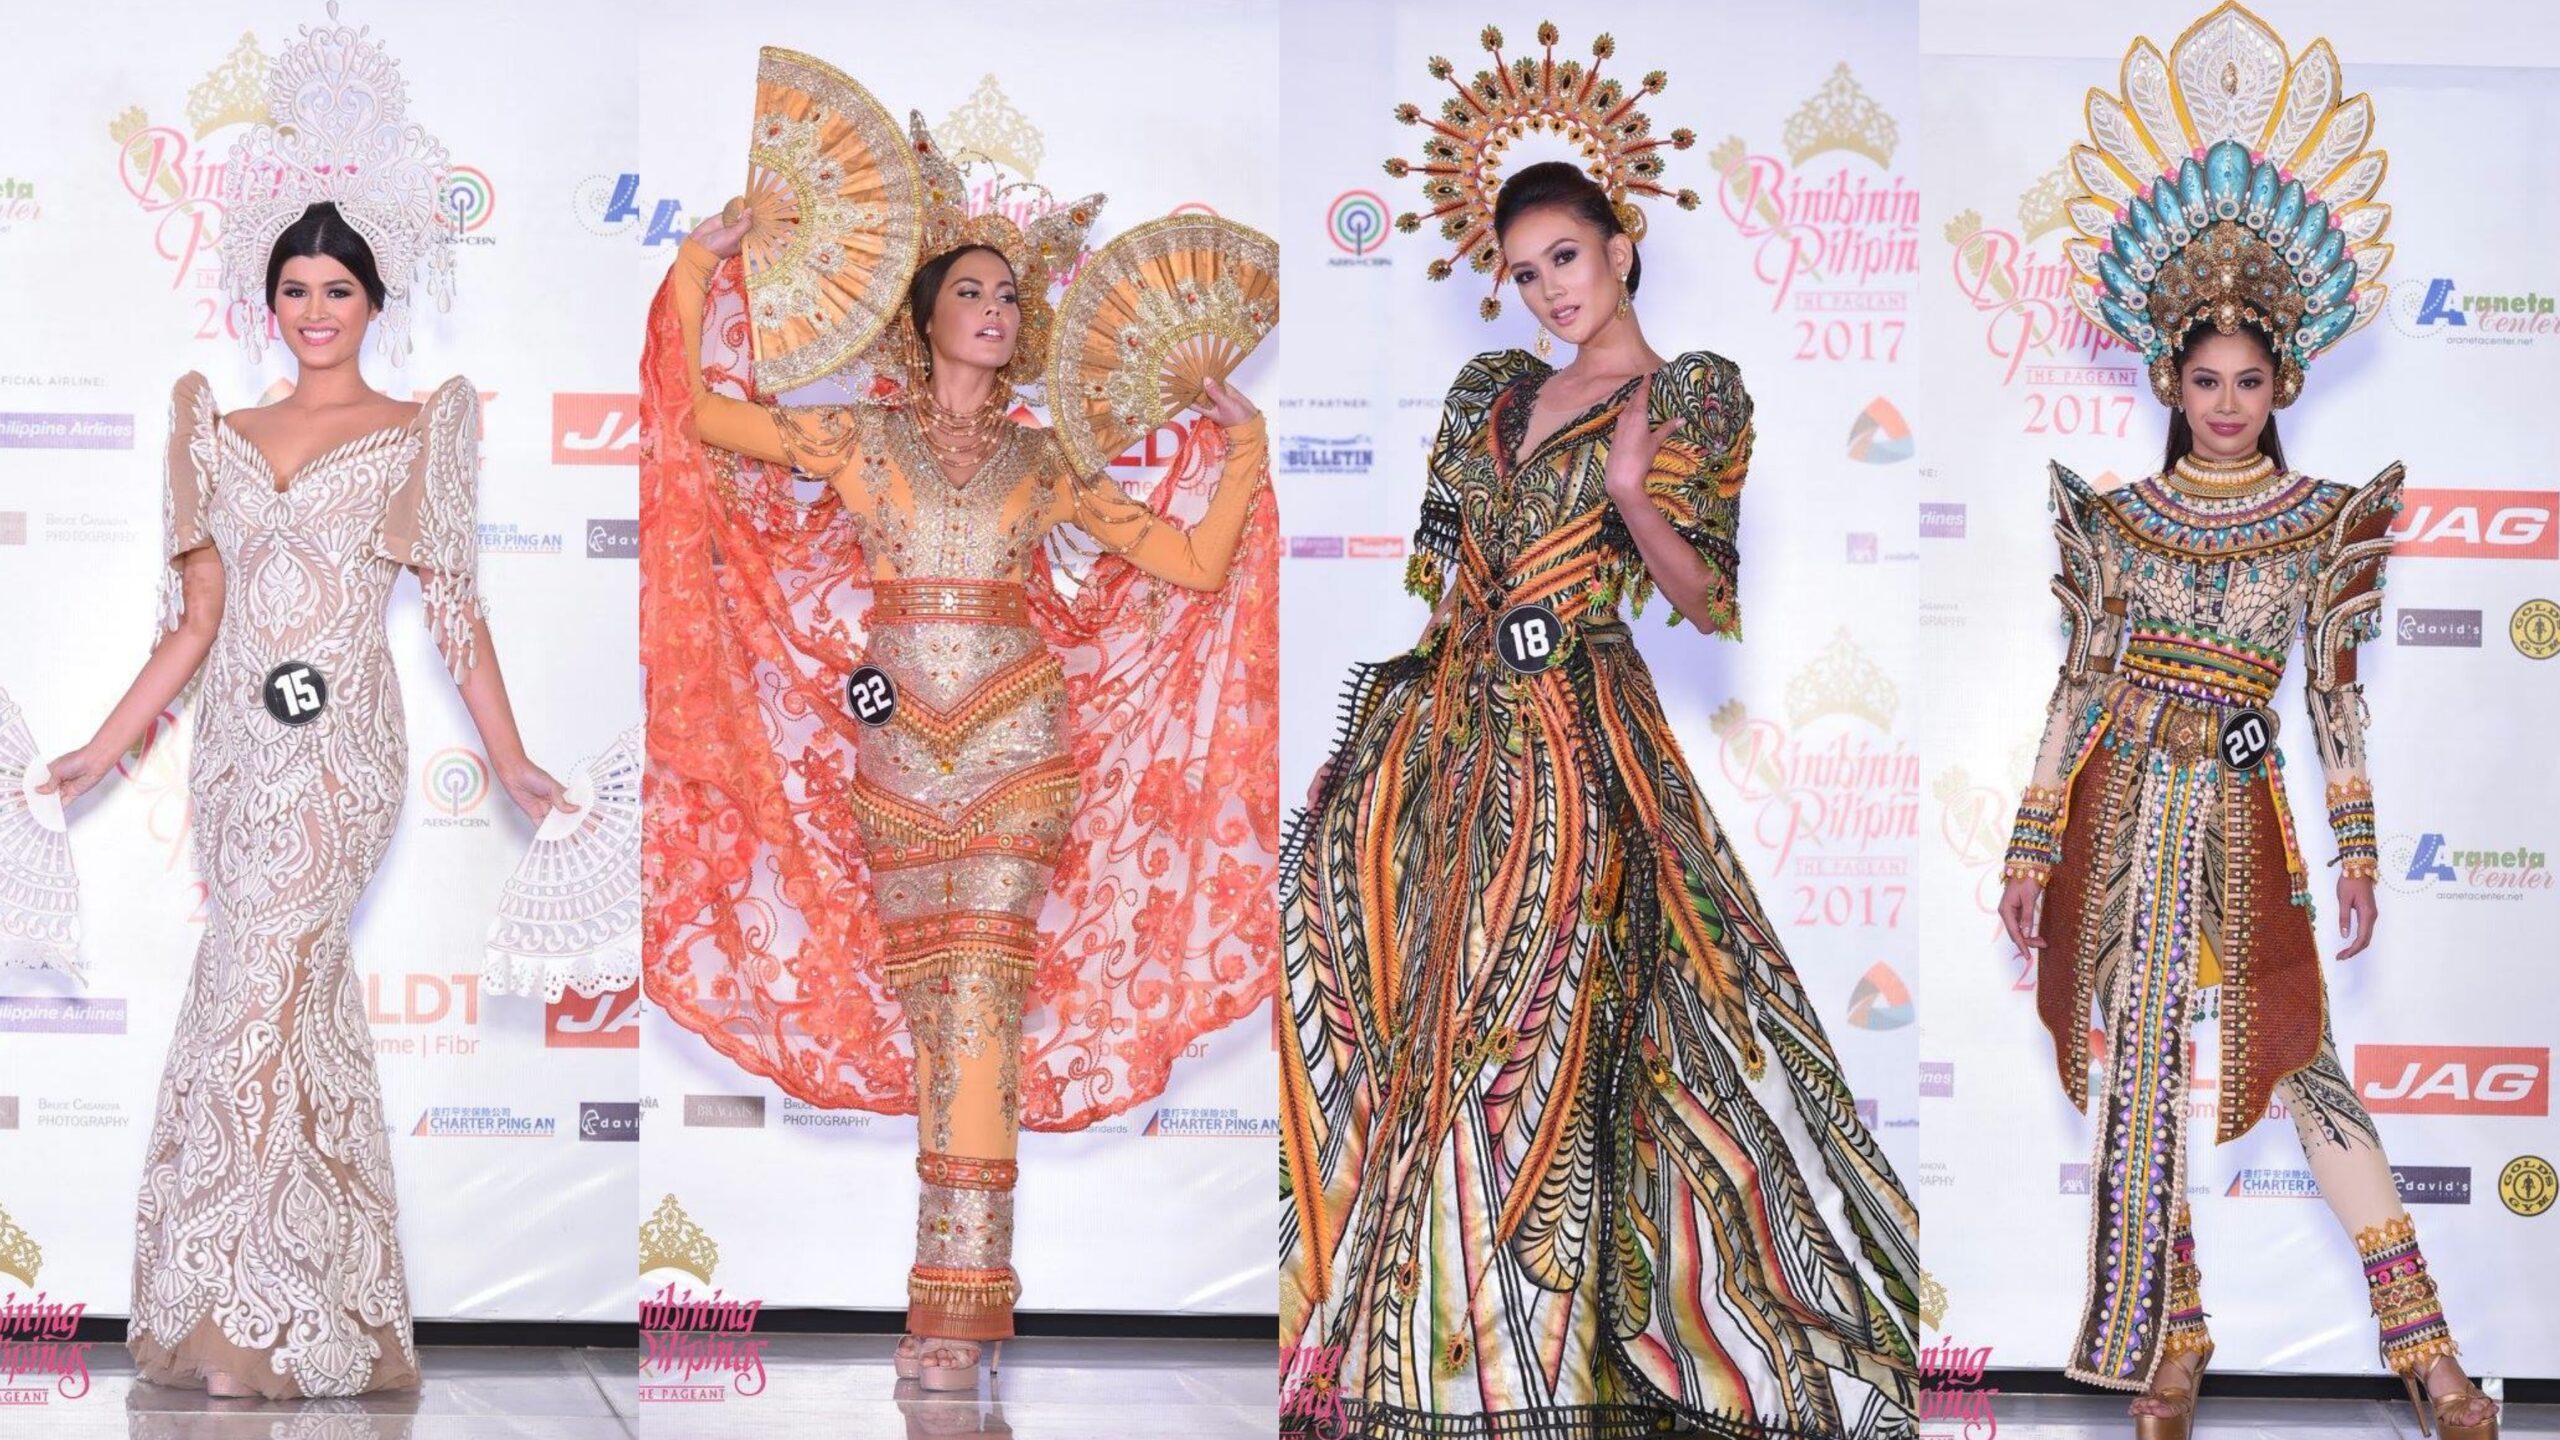 IN PHOTOS: Bb Pilipinas 2017 official top 10 national costumes